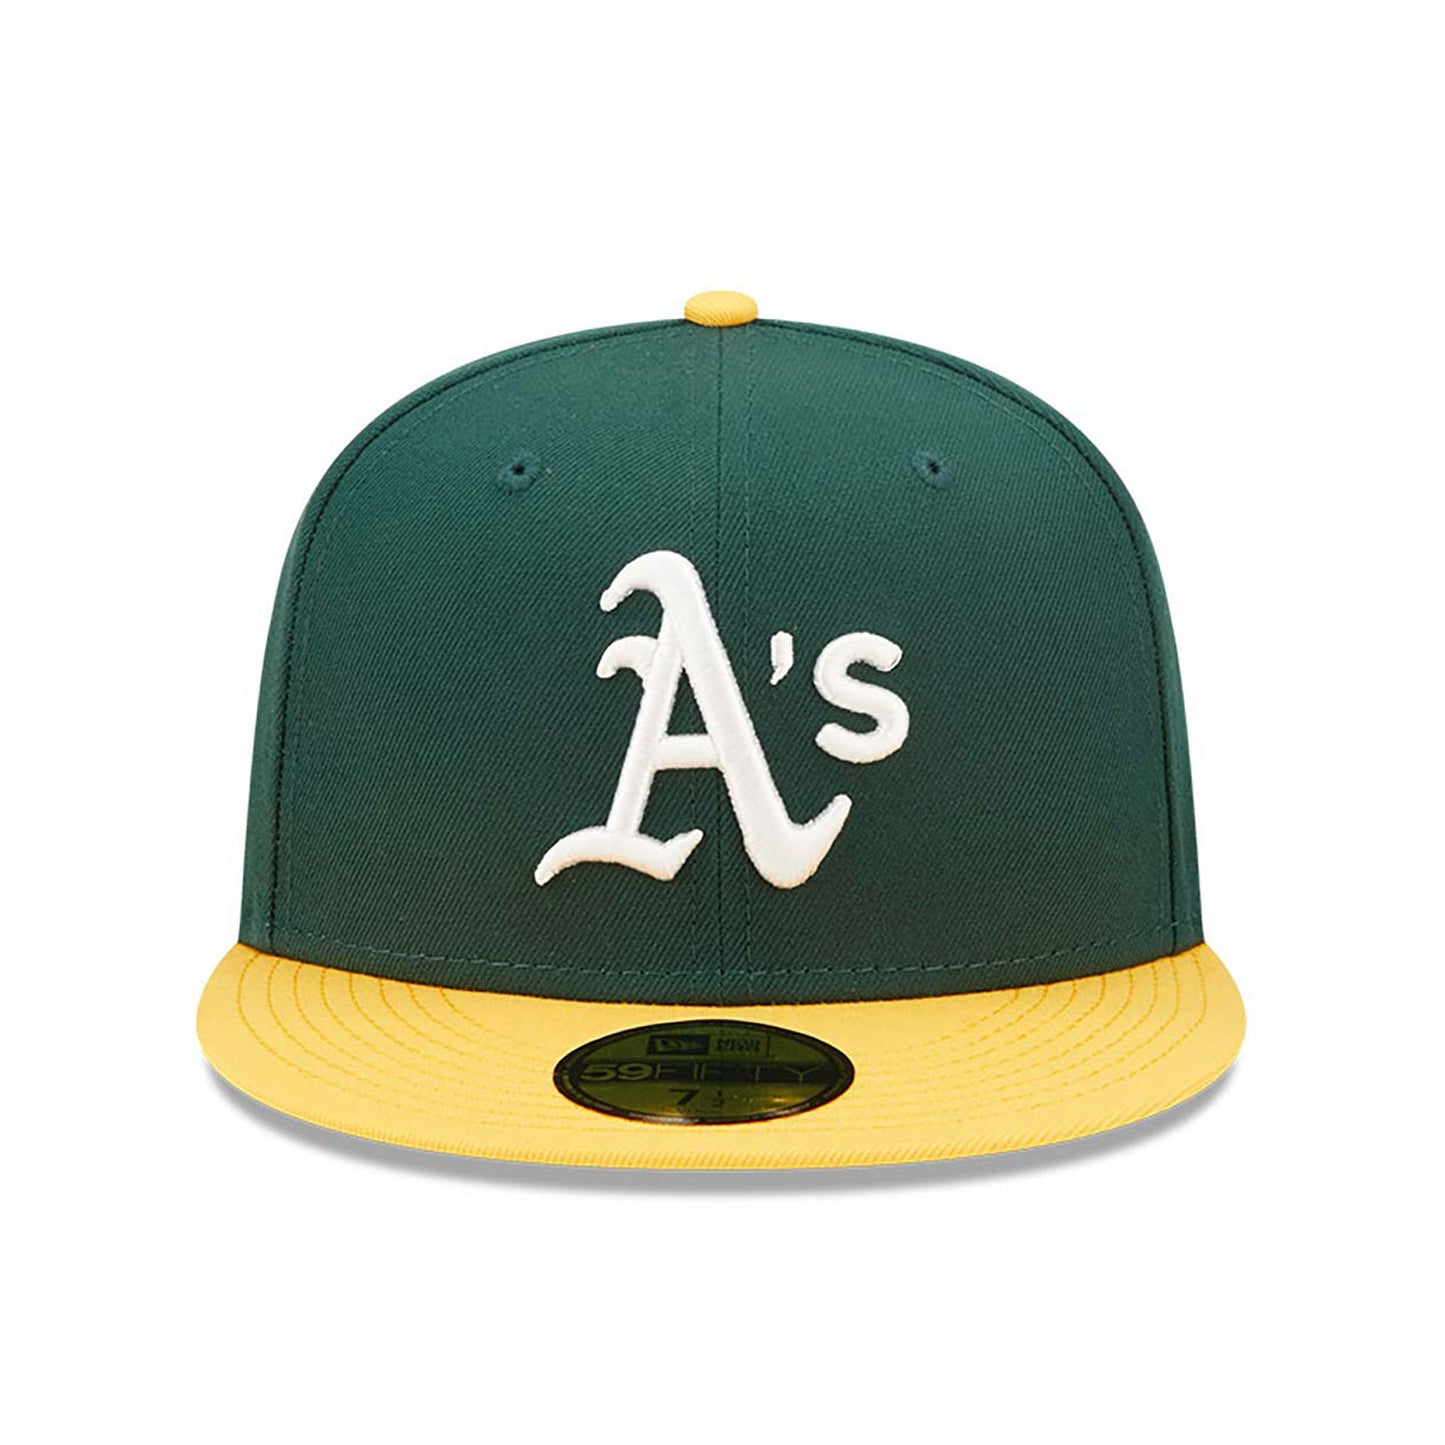 NEW ERA Oakland Athletics Authentic On Field Dark Green 59FIFTY Fitted Cap